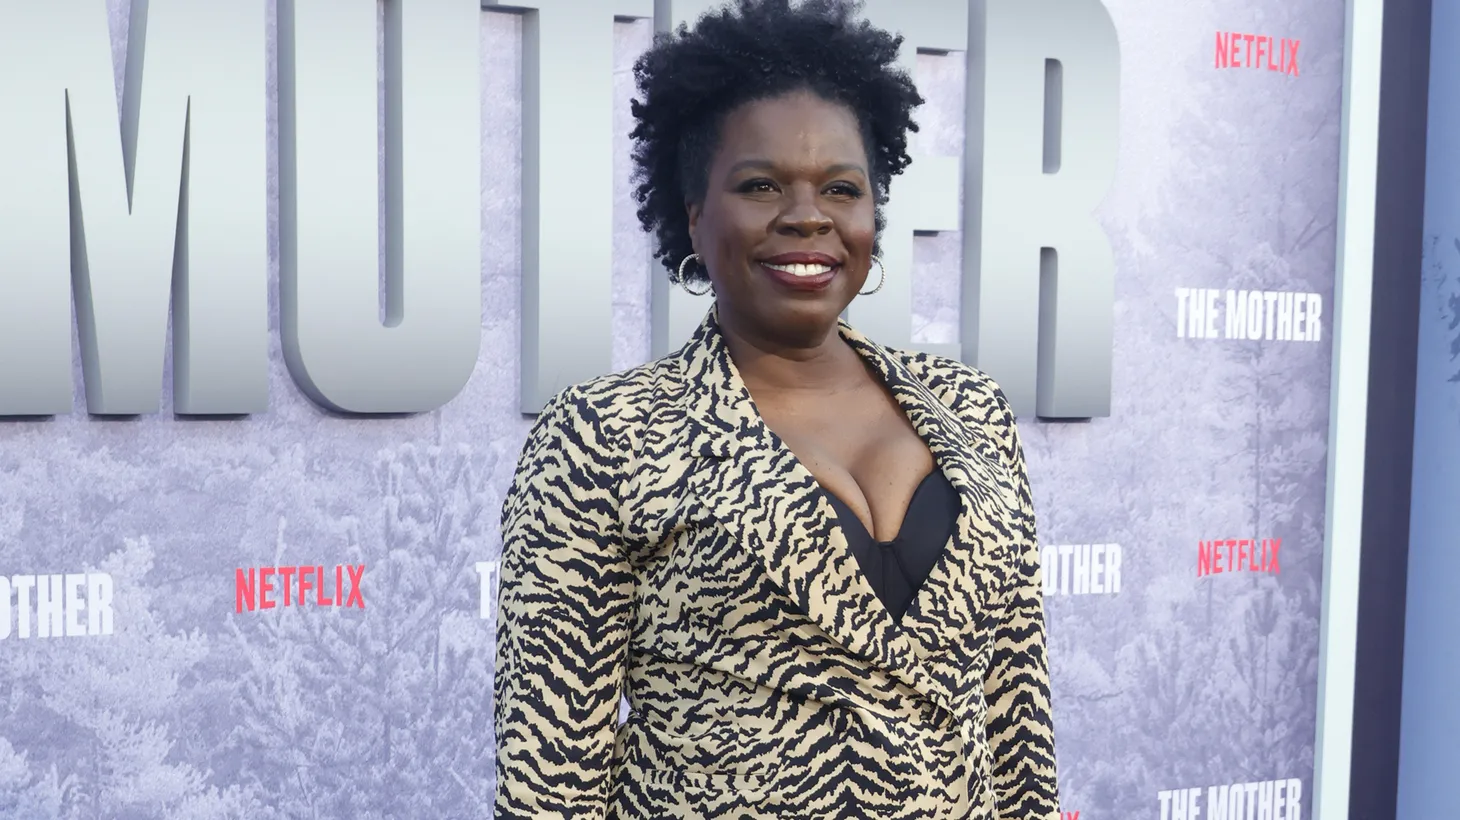 Comedian Leslie Jones attends the premiere of Netflix's "The Mother" held at Westwood Regency Village Theater in Los Angeles on May 10, 2023.